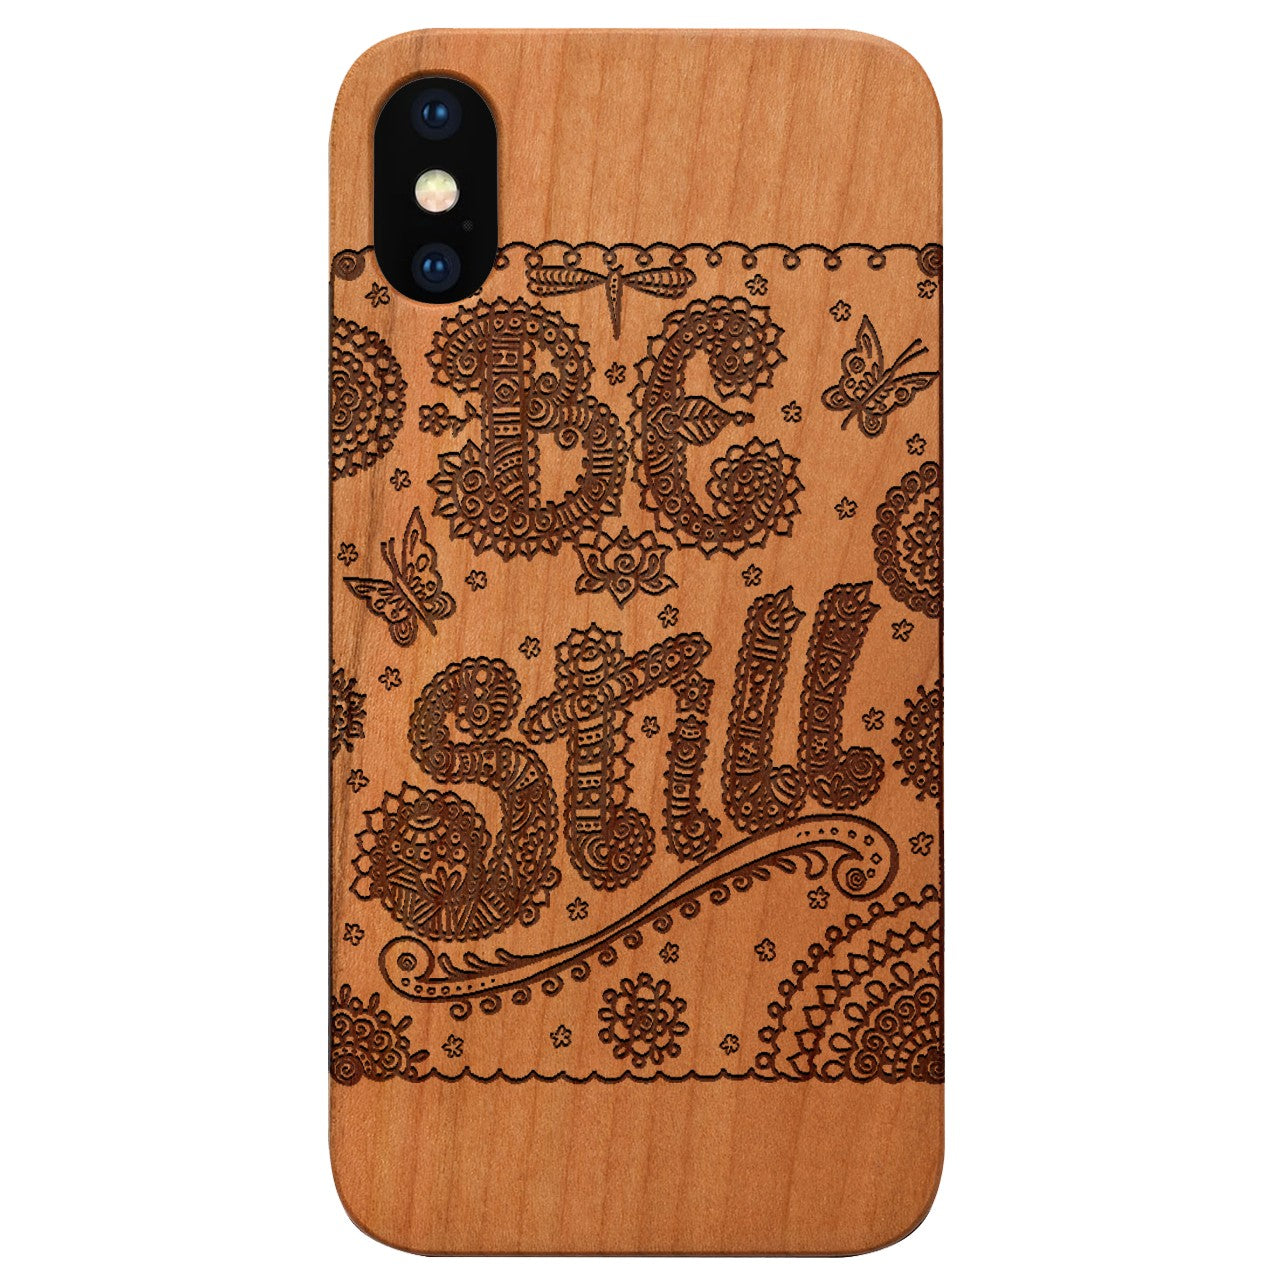  Be Still - Engraved - Wooden Phone Case - IPhone 13 Models